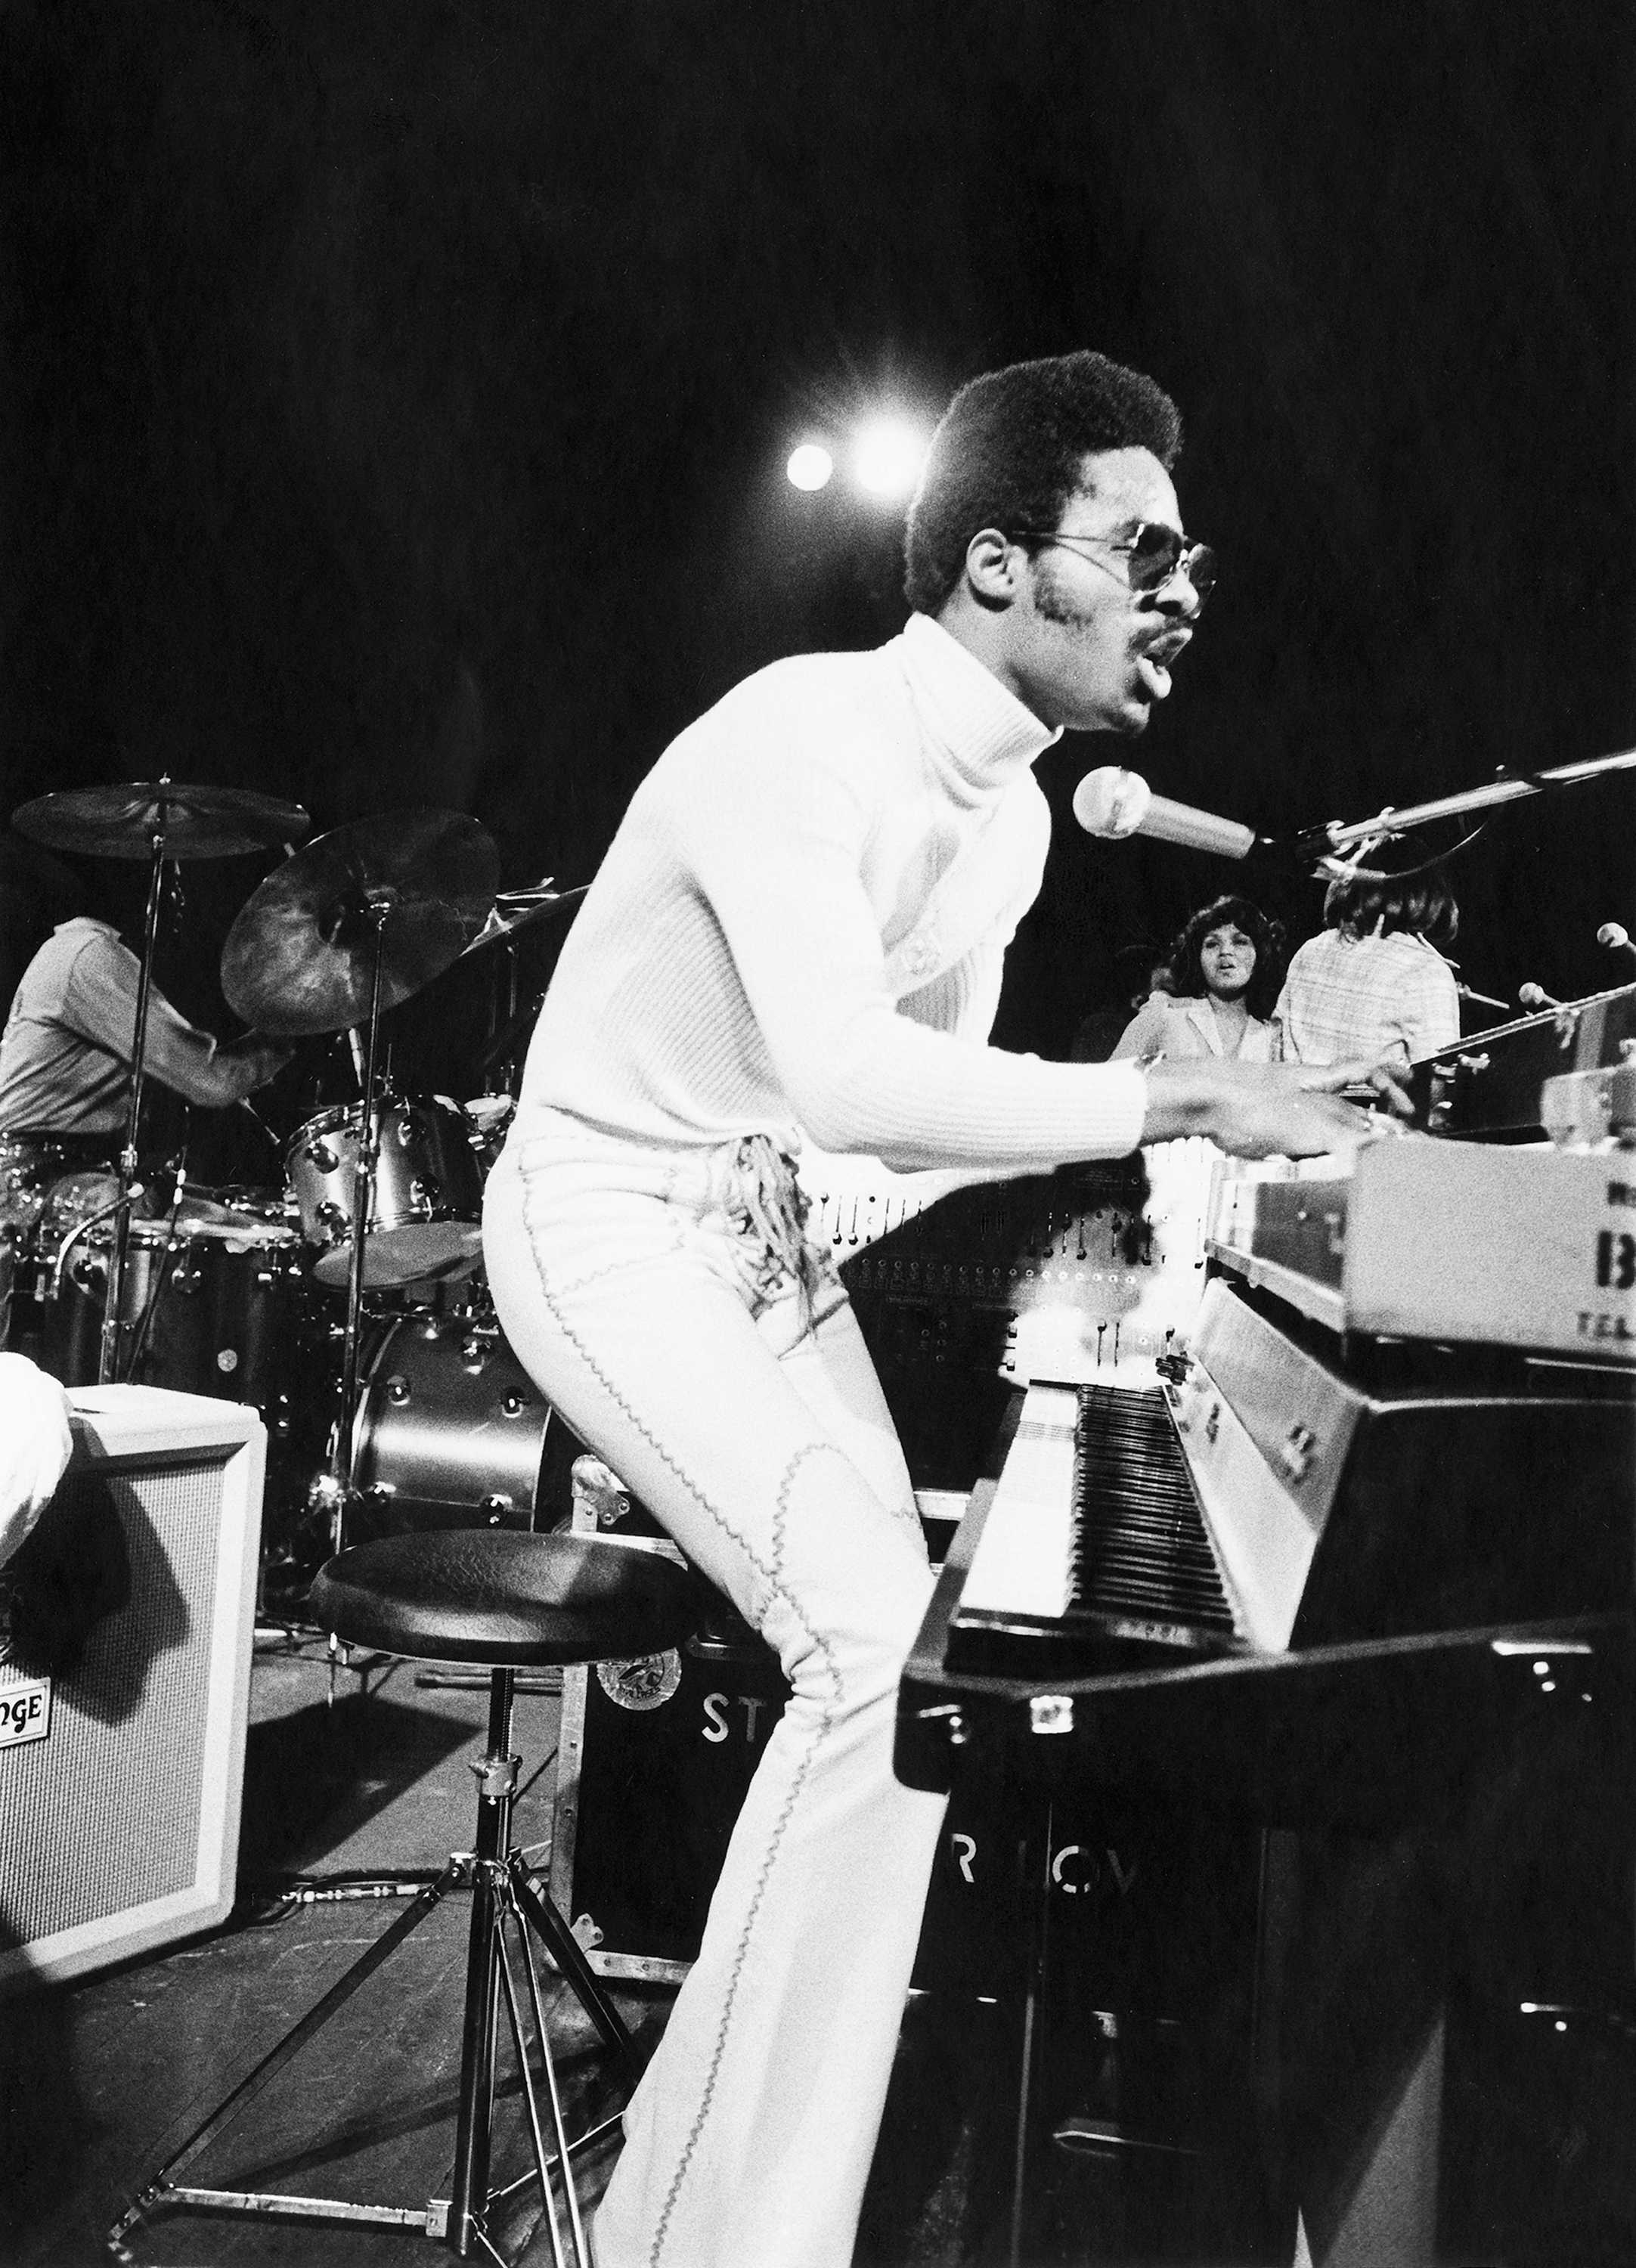 Black and white photograph of Stevie Wonder performing on stage